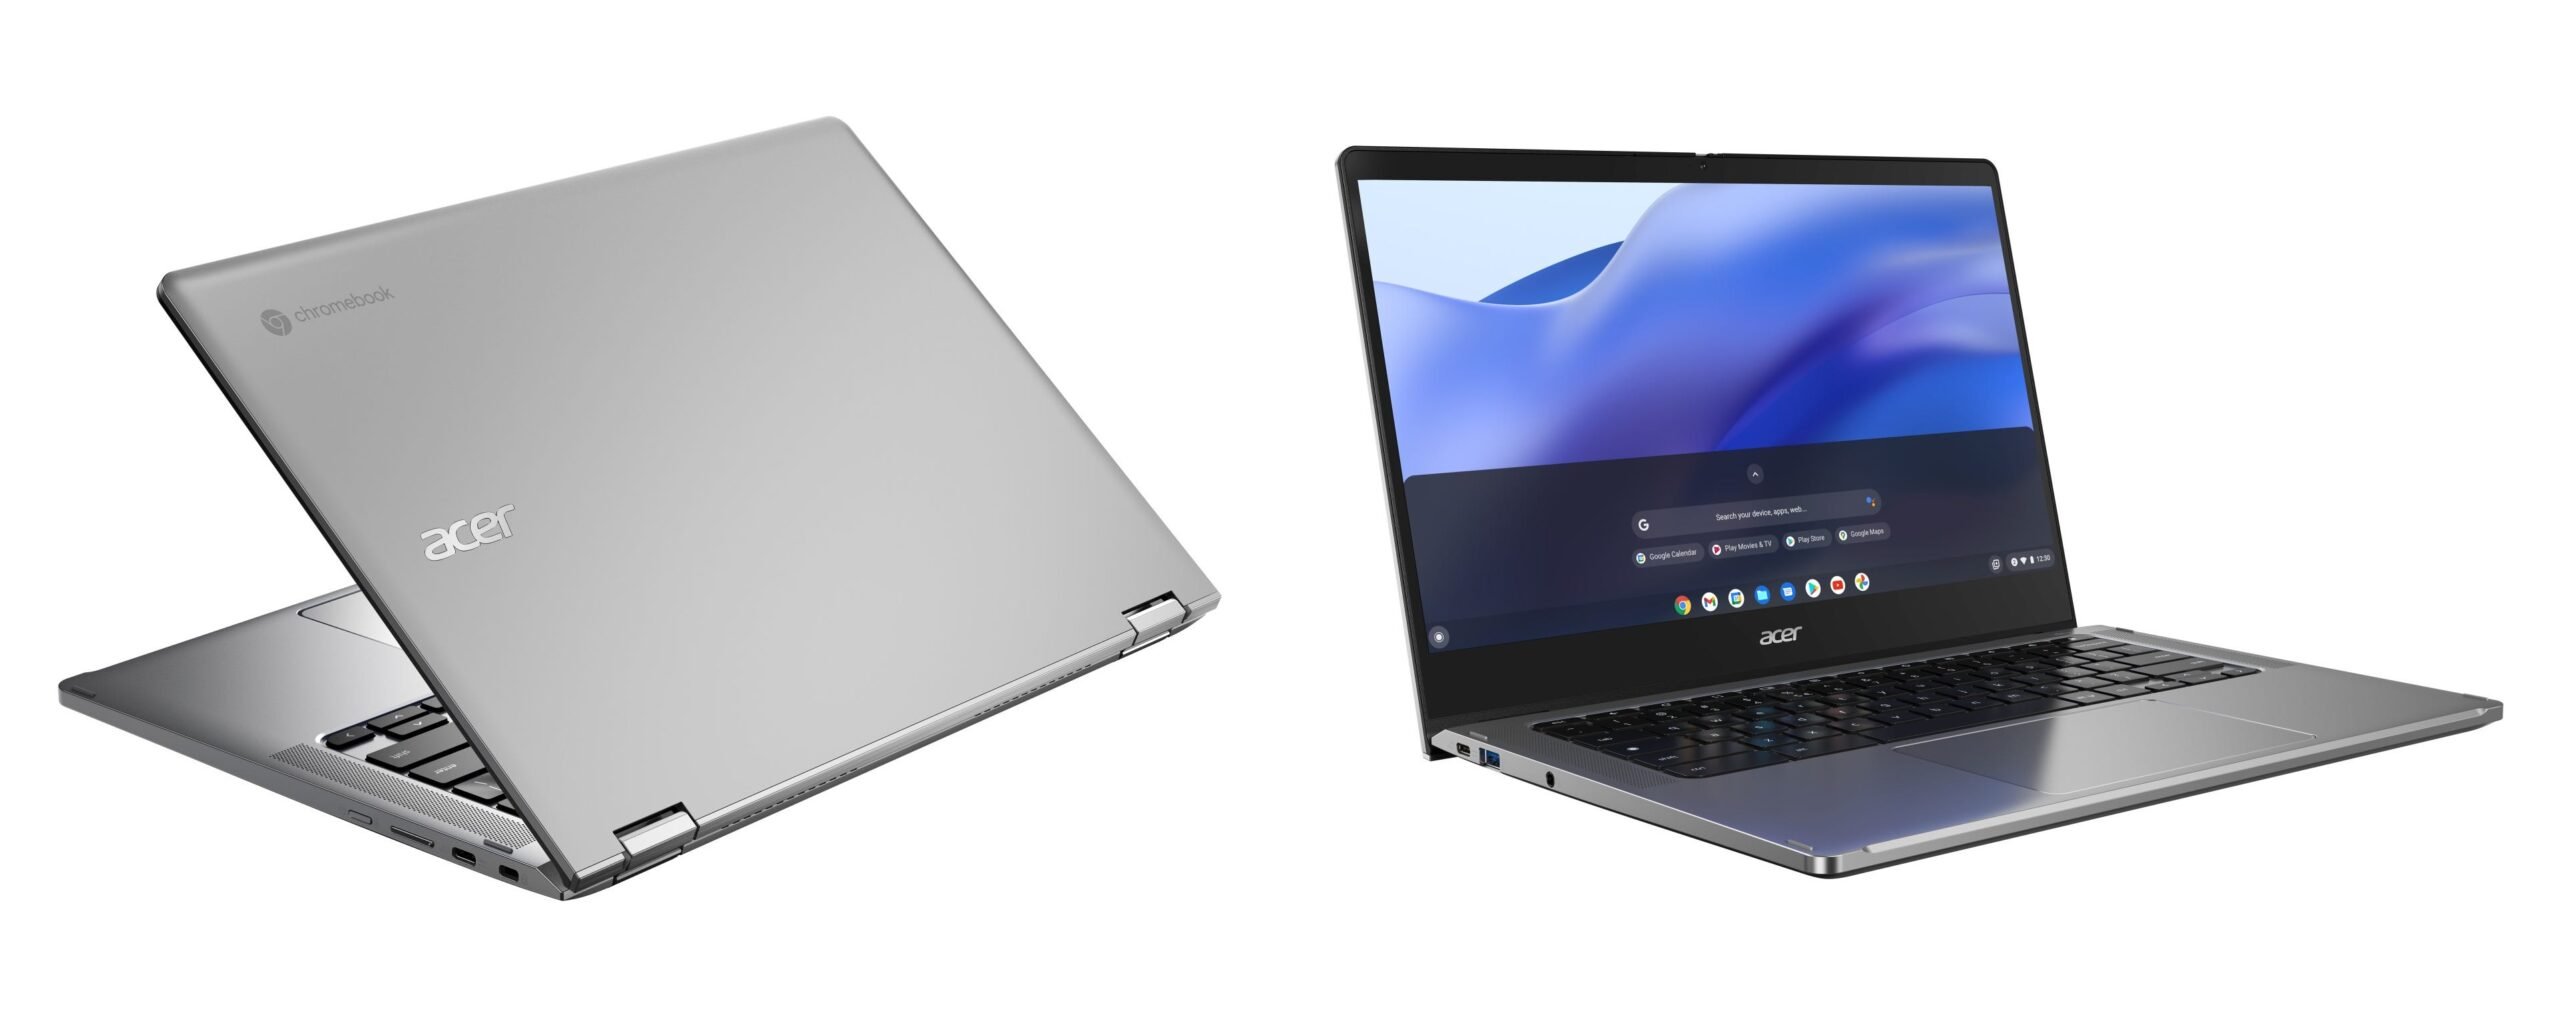 Acer Chromebooks from back and front